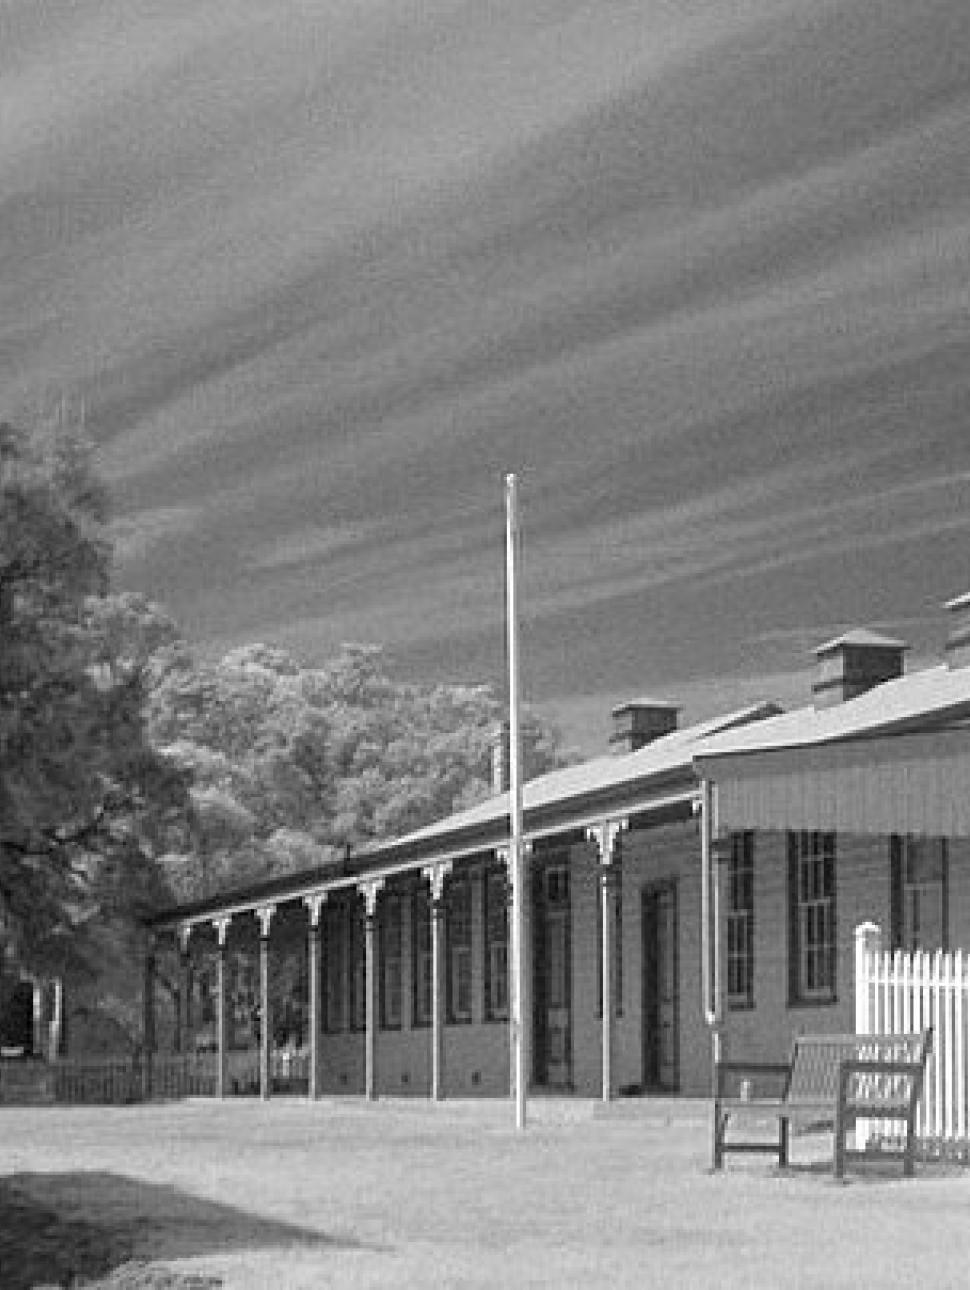 Black and white photos of an old style weather board clad building with a front verandah, and next door is a white picket fence.  On the other side of the building are tall trees.